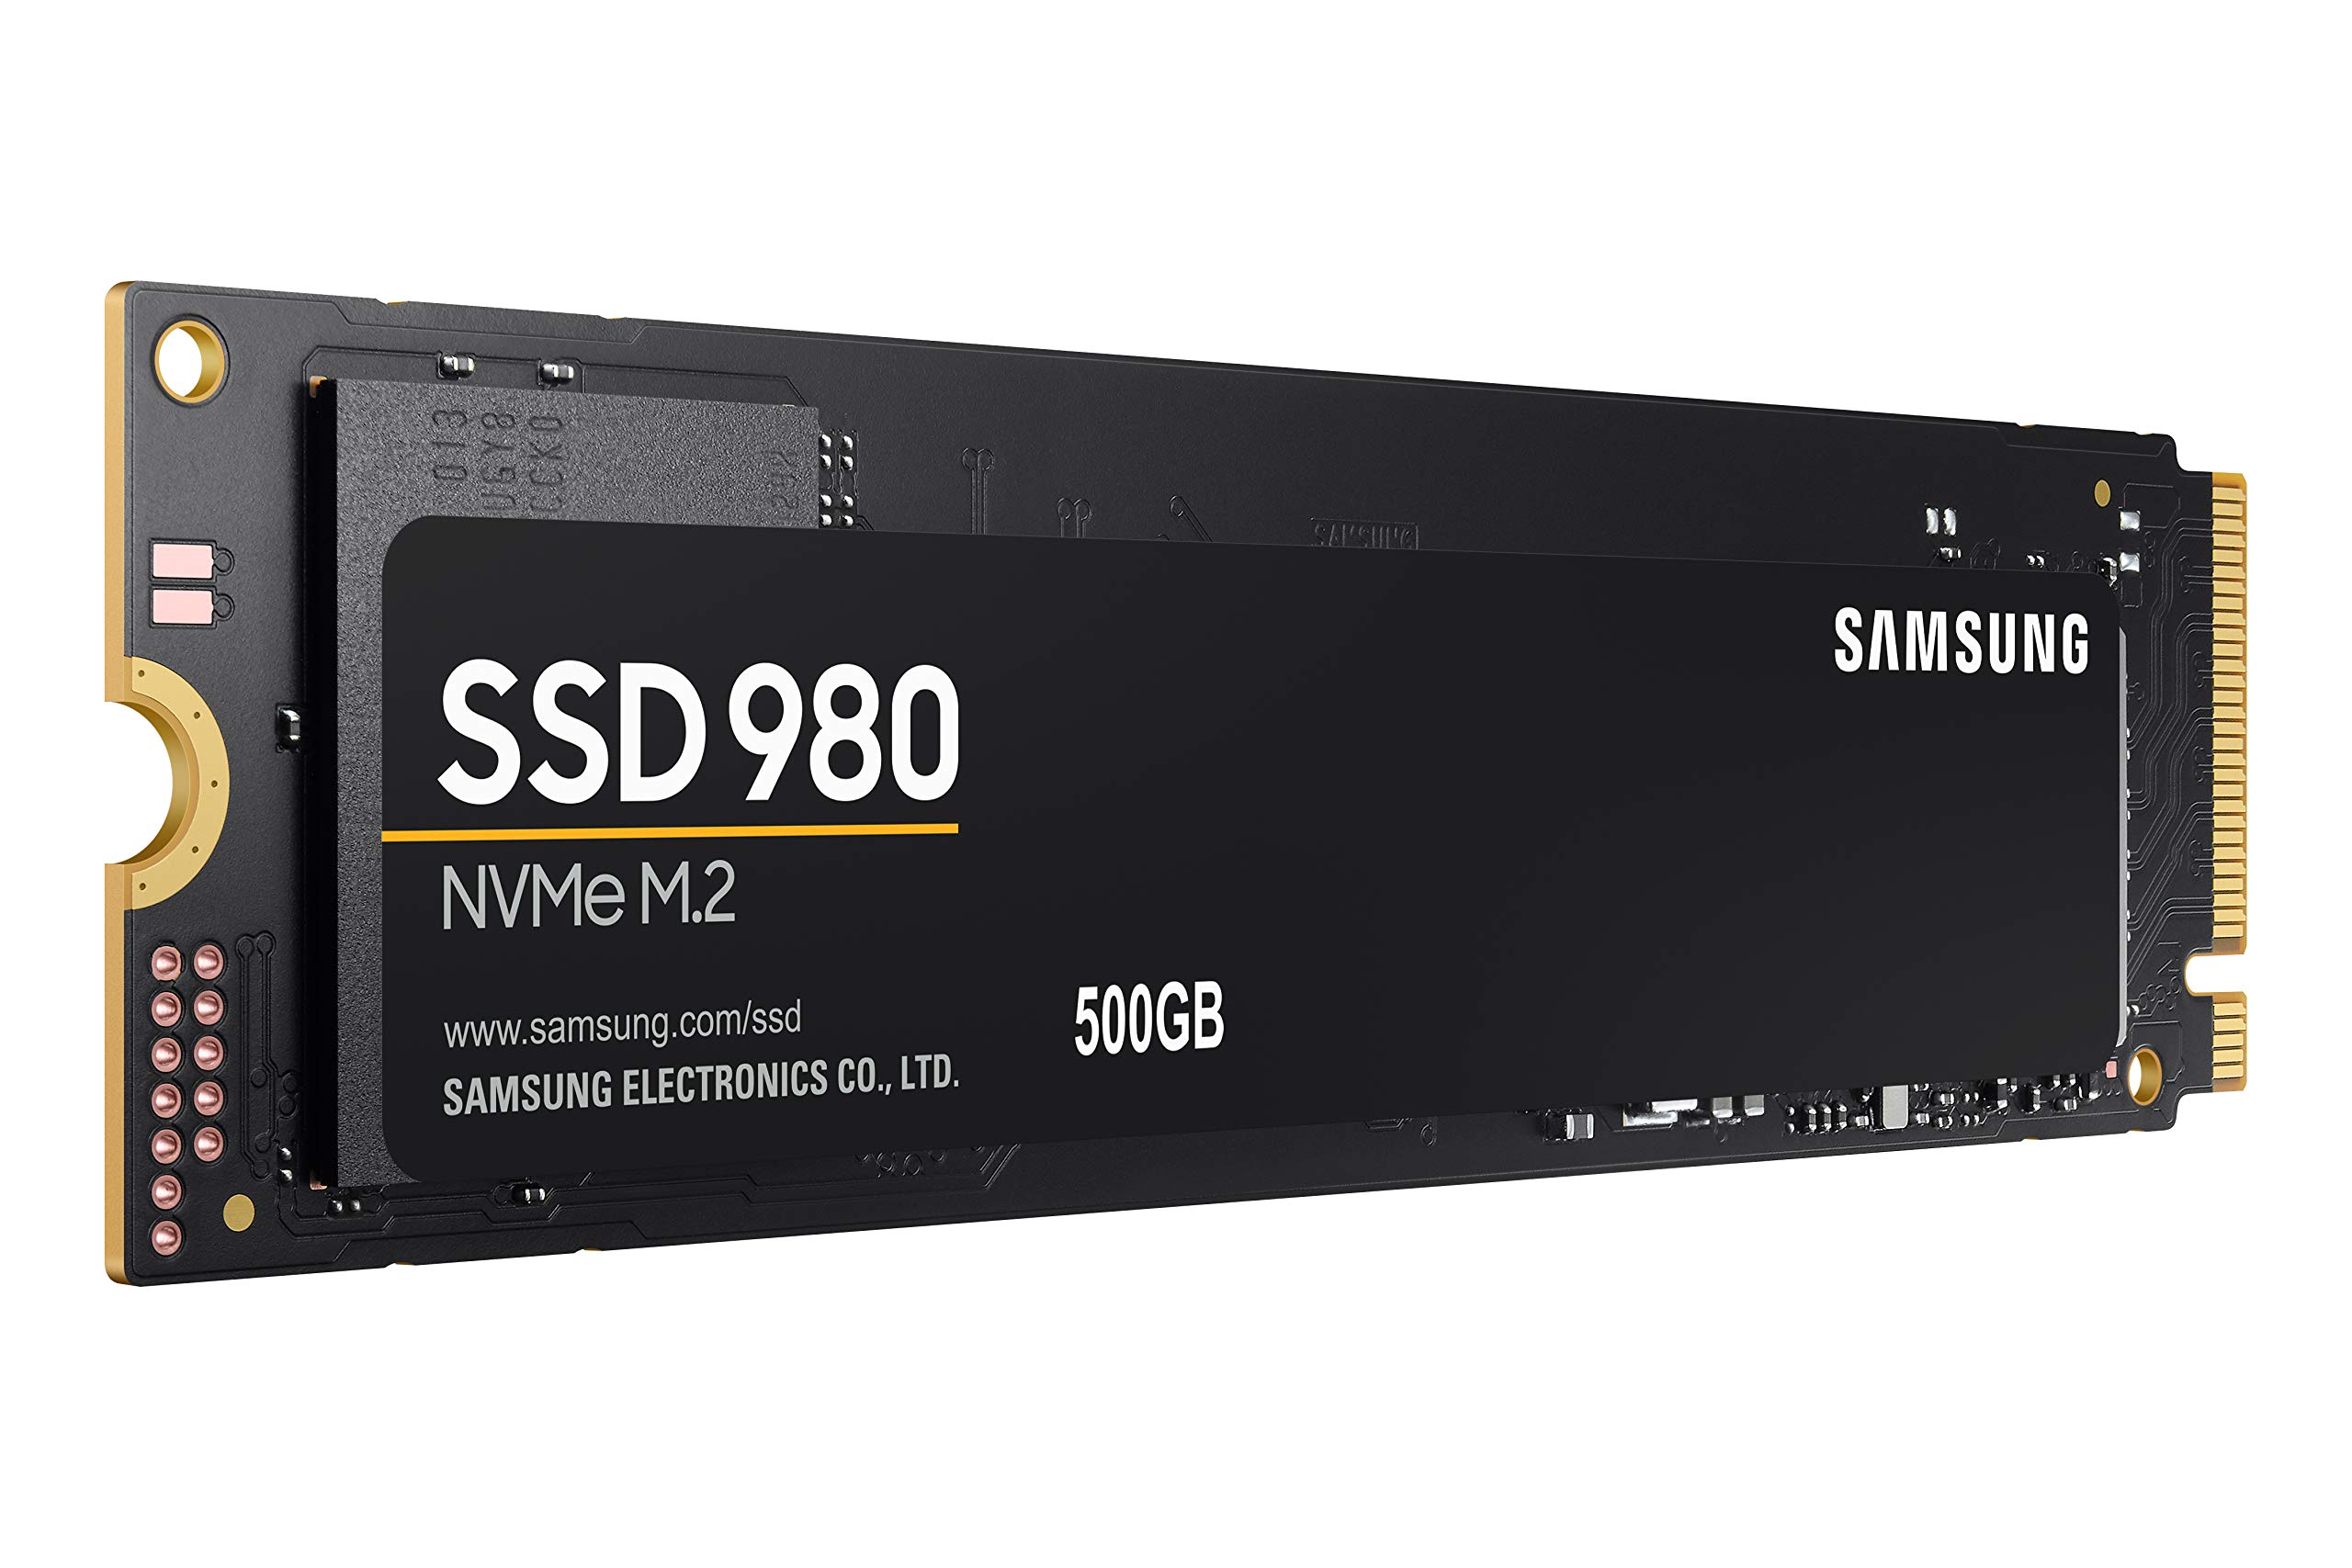 SAMSUNG 980 SSD 500GB PCle 3.0x4, NVMe M.2 2280, Internal Solid State Drive, Storage for PC, Laptops, Gaming and More, HMB Technology, Intelligent Turbowrite, Speeds up-to 3,500MB/s, MZ-V8V500B/AM